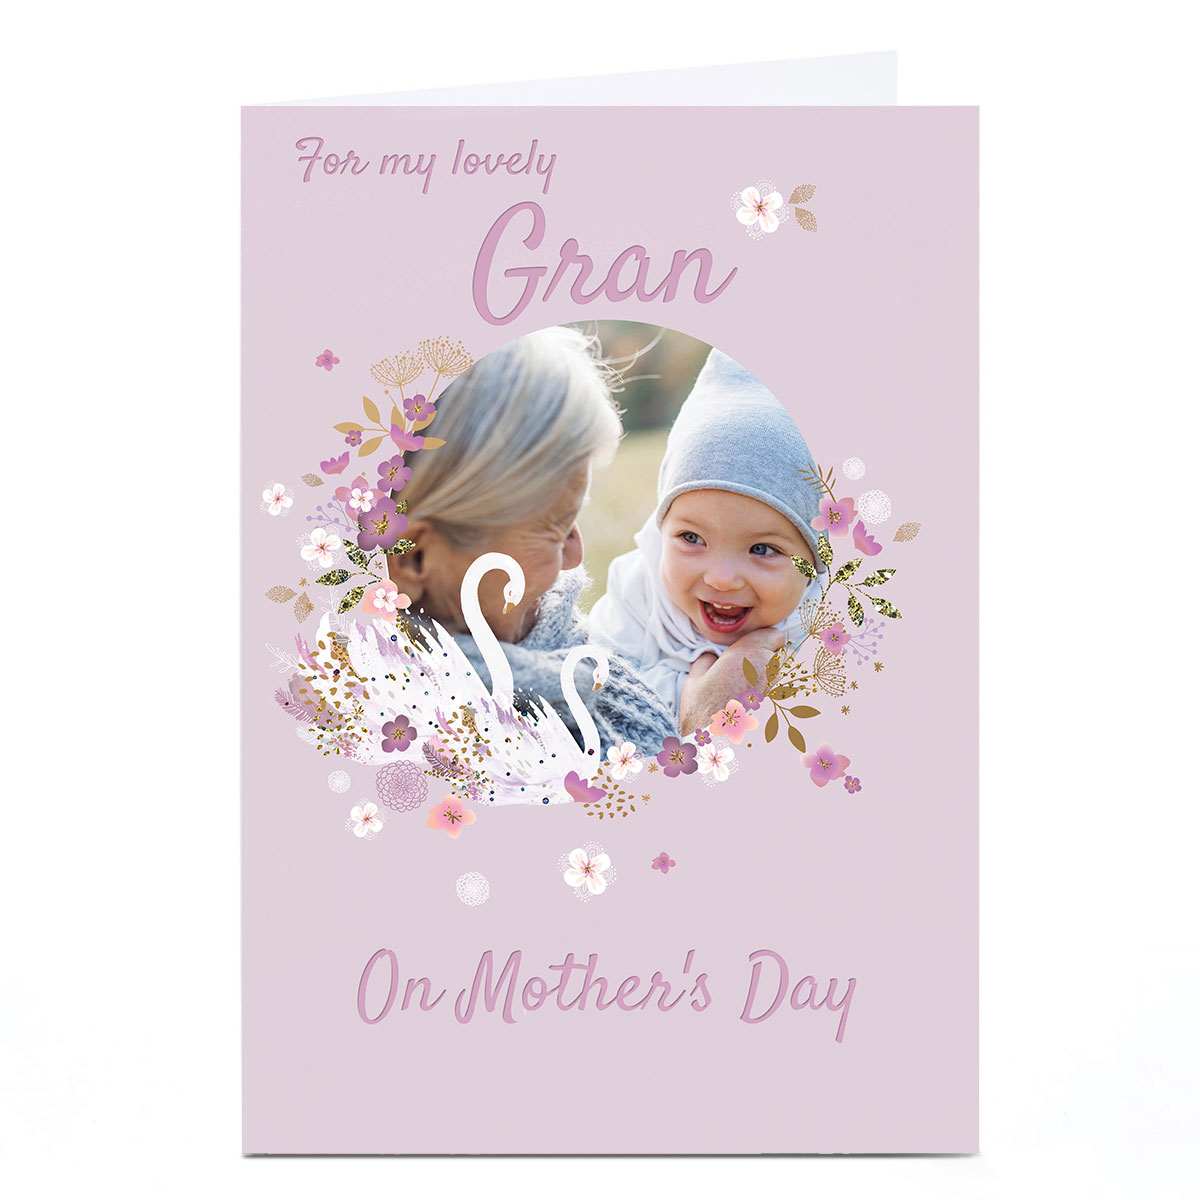 Photo Kerry Spurling Mother's Day Card - Gran, Swans